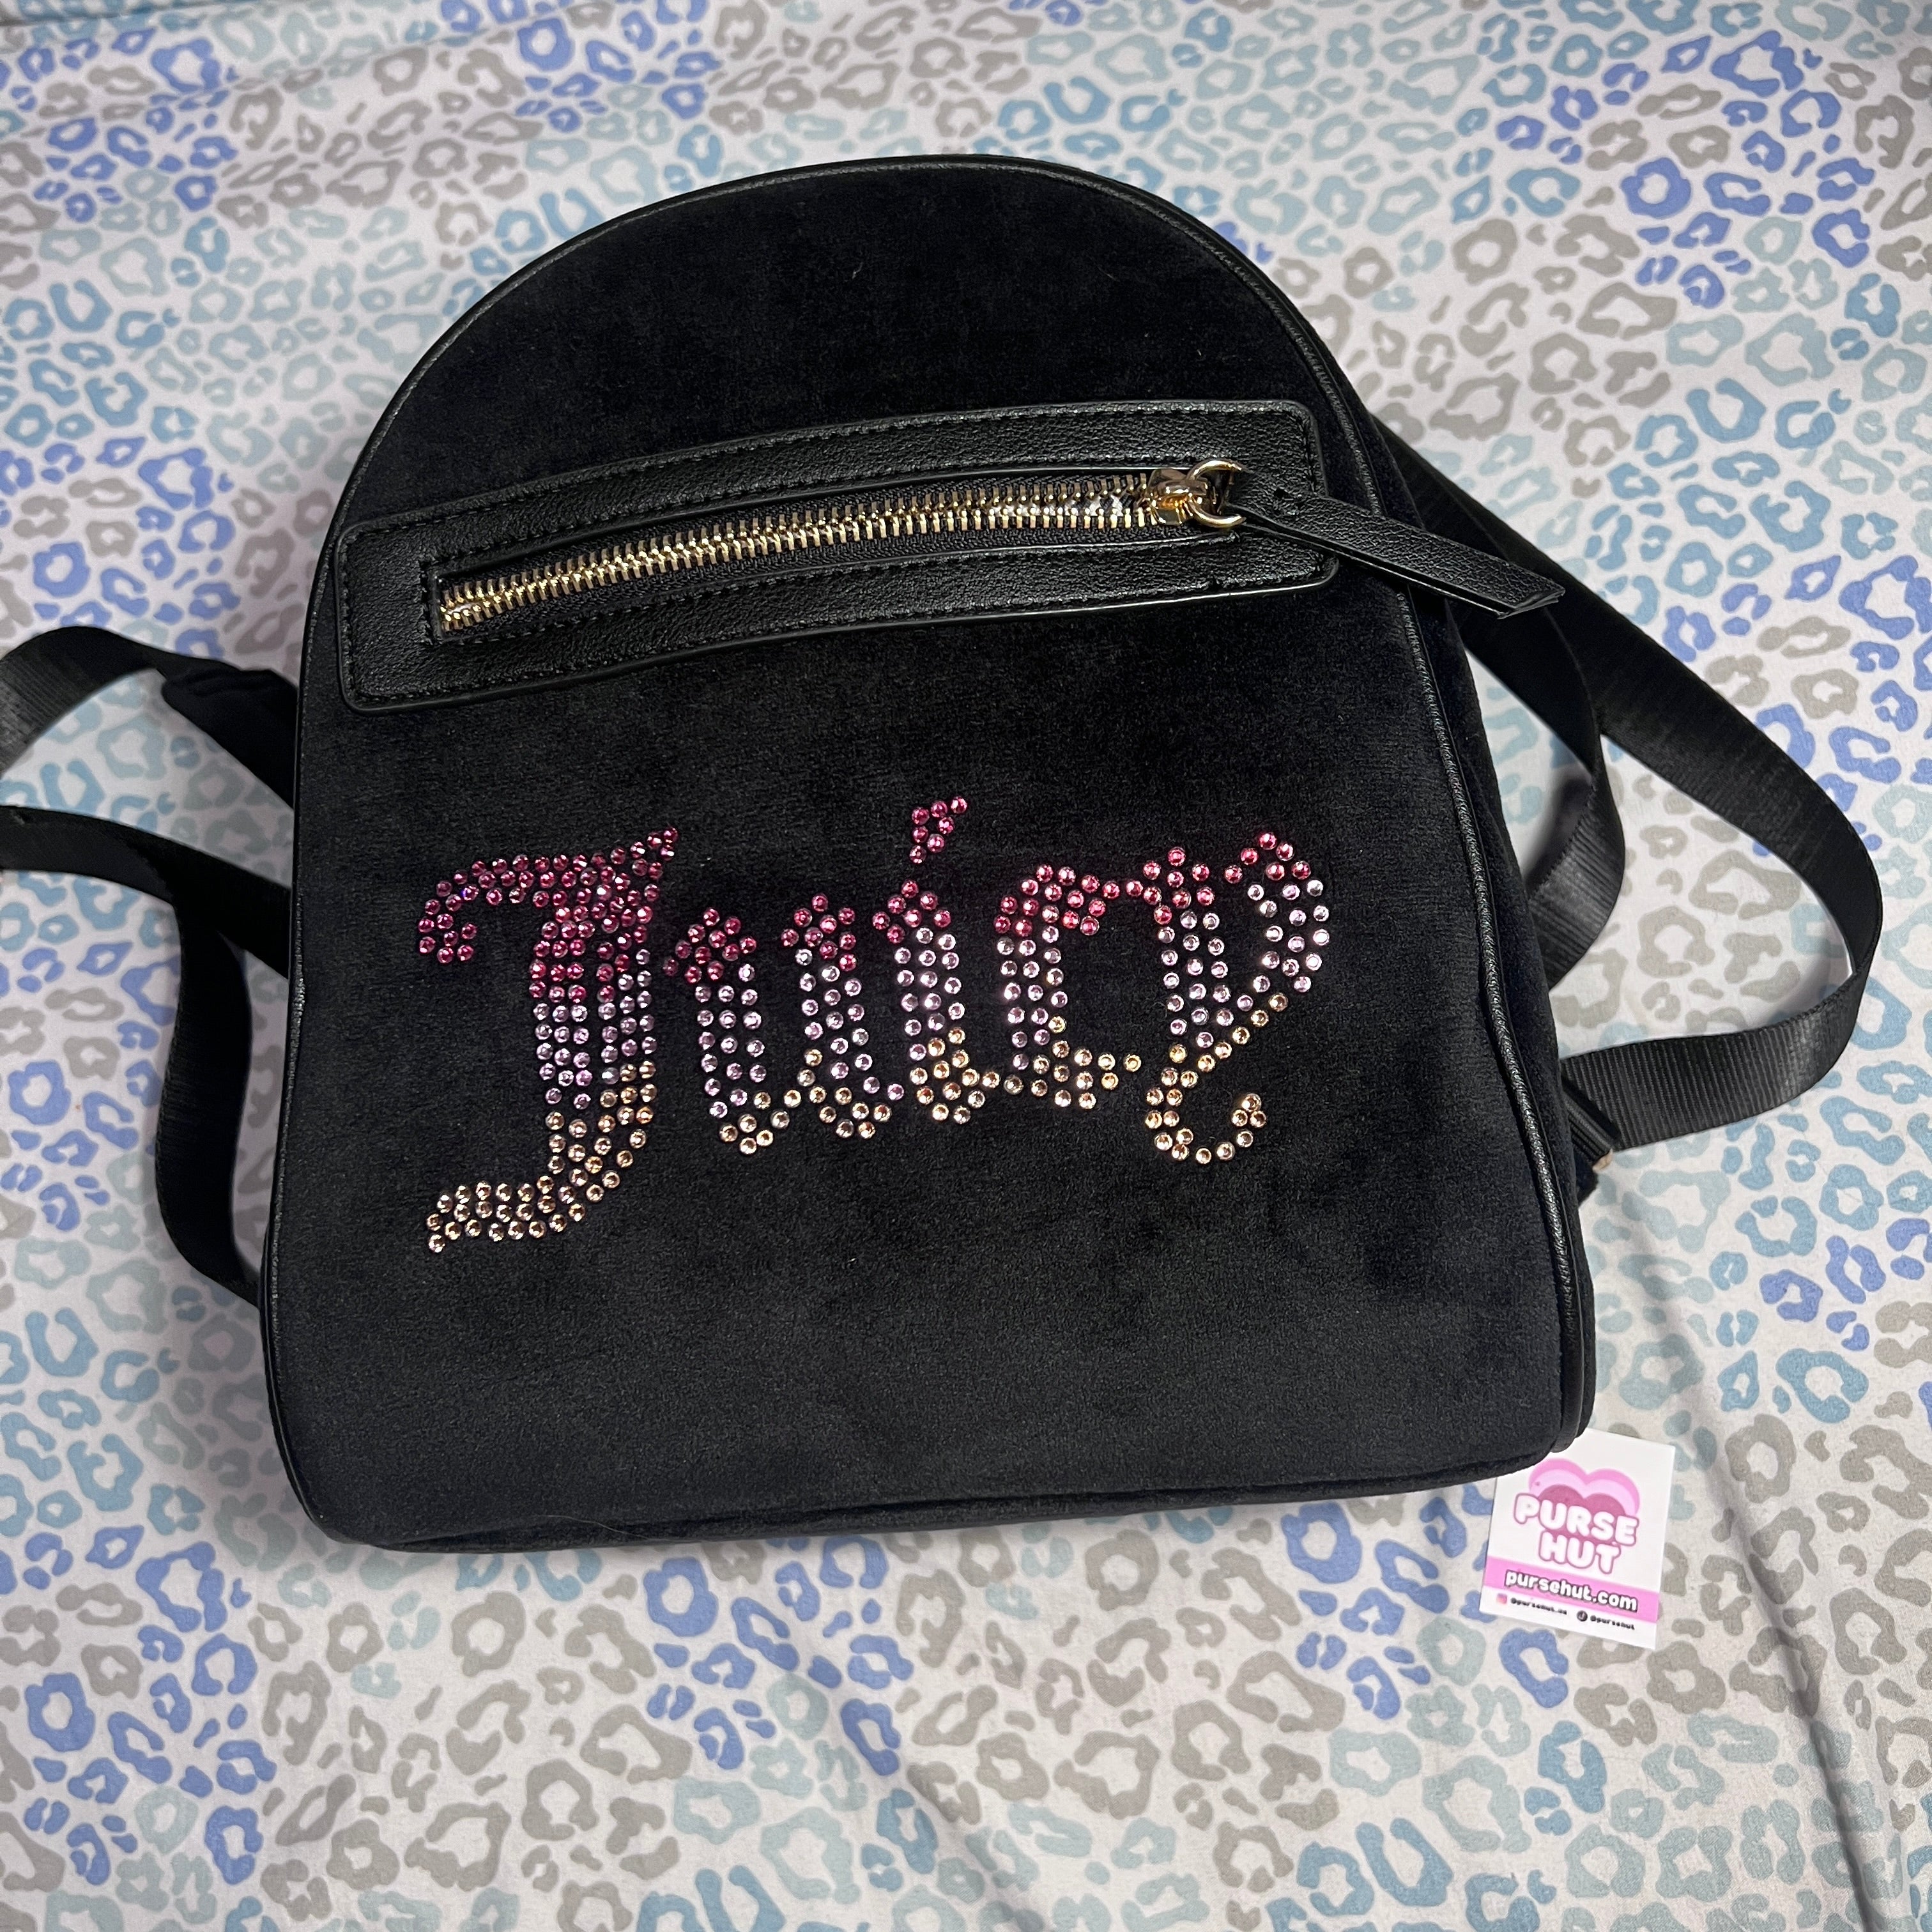 Beautiful juicy couture backpack - Gem